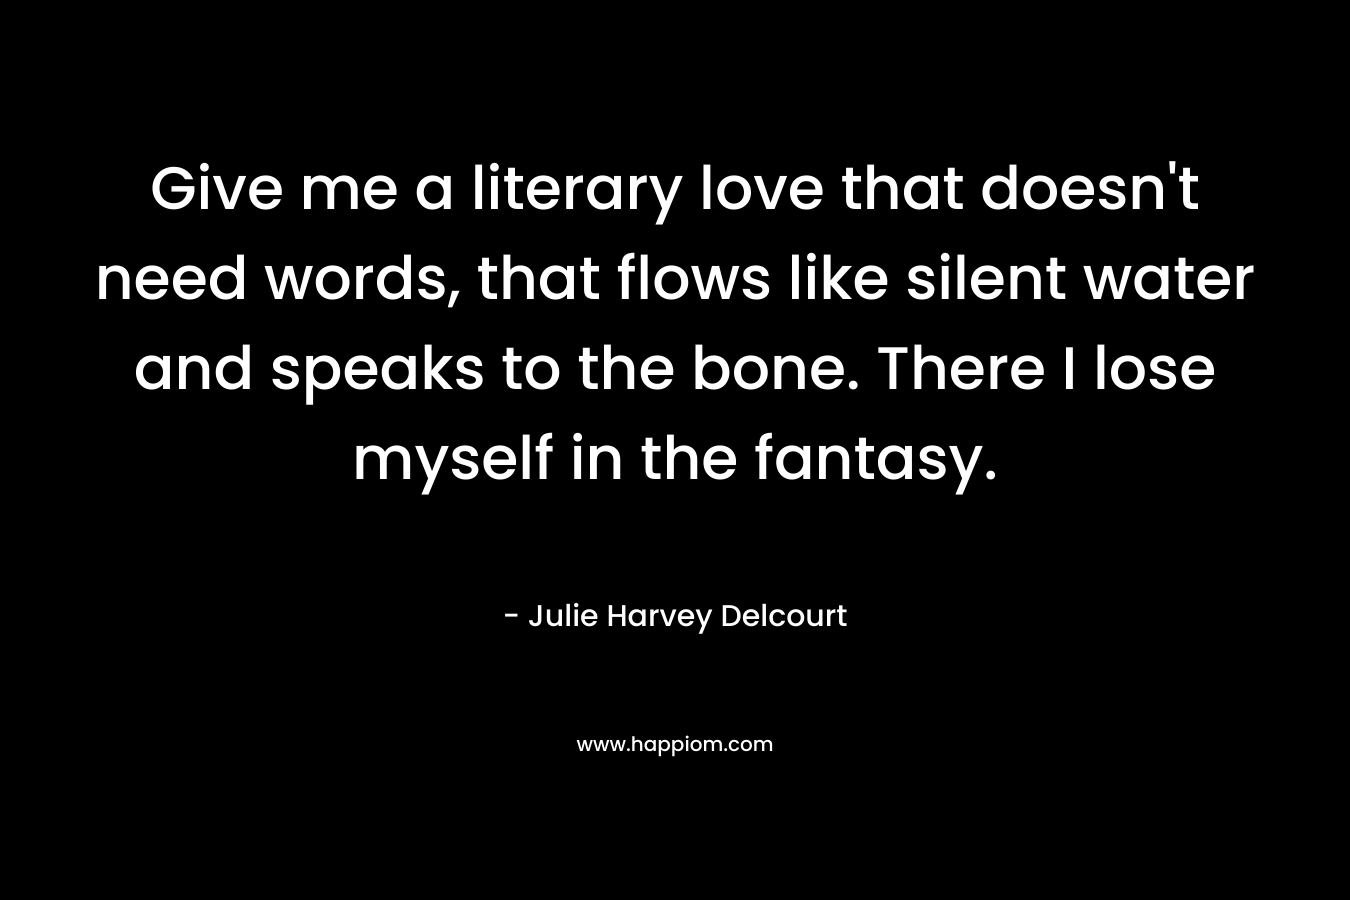 Give me a literary love that doesn't need words, that flows like silent water and speaks to the bone. There I lose myself in the fantasy.